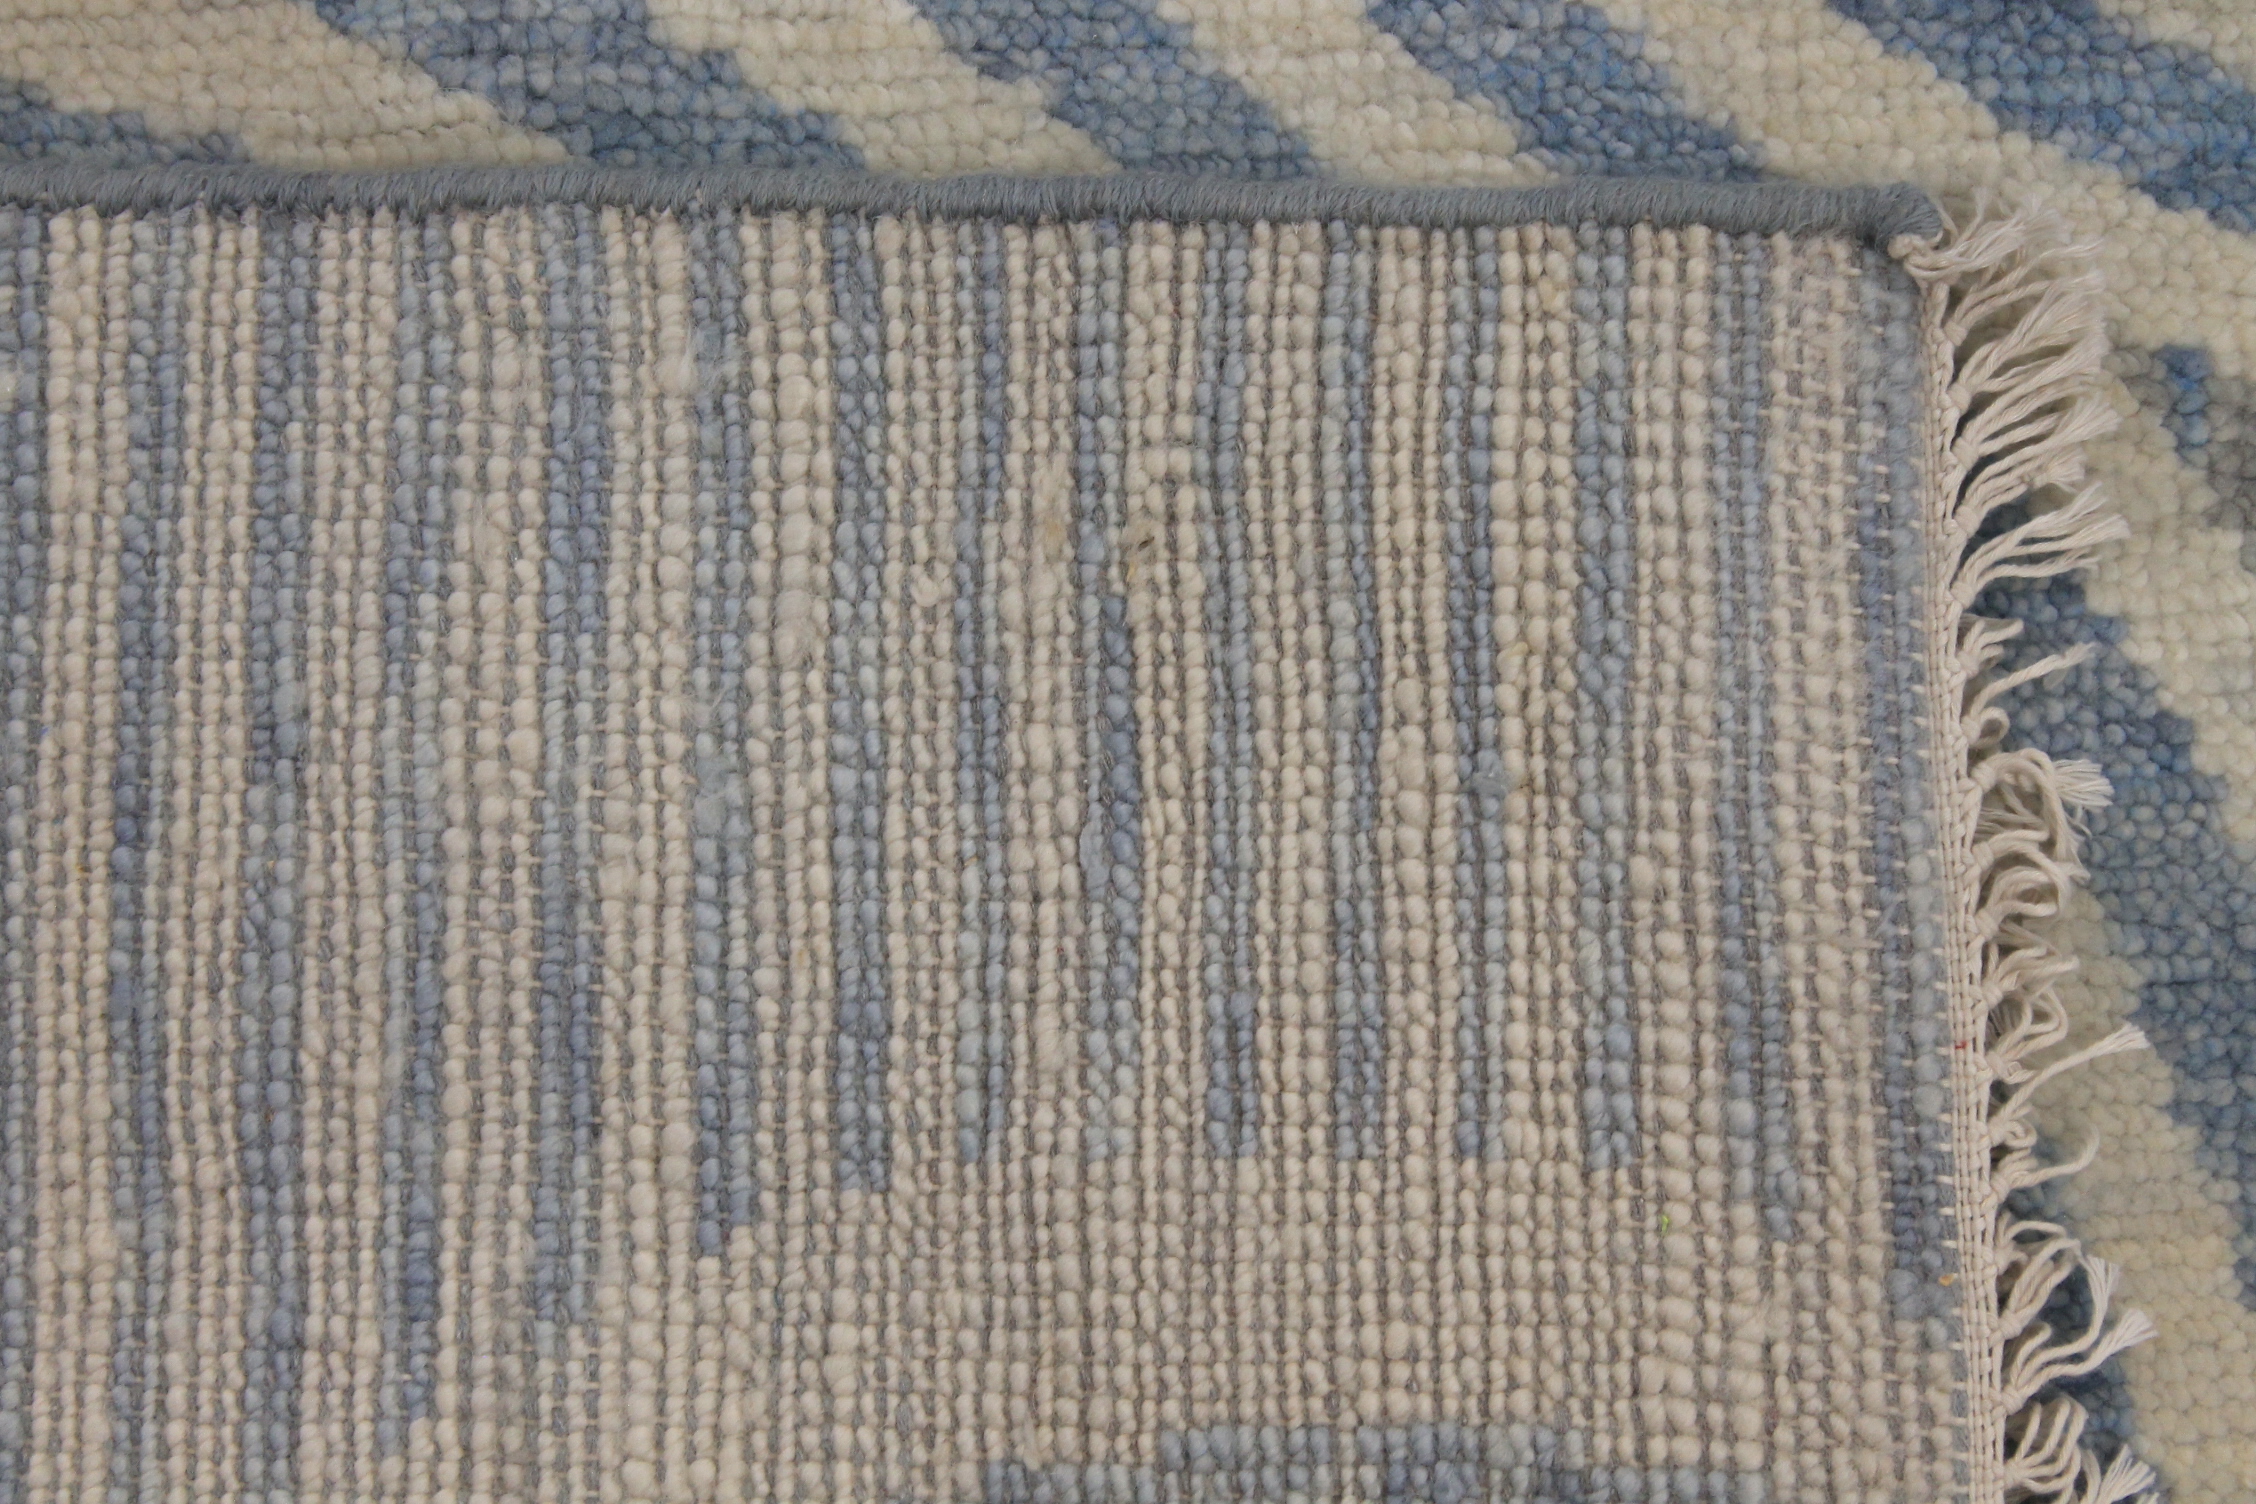 Contemporary & Transitional Rugs EDGE 027552 Medium Blue - Navy & Lt. Grey - Grey Hand Knotted Rug